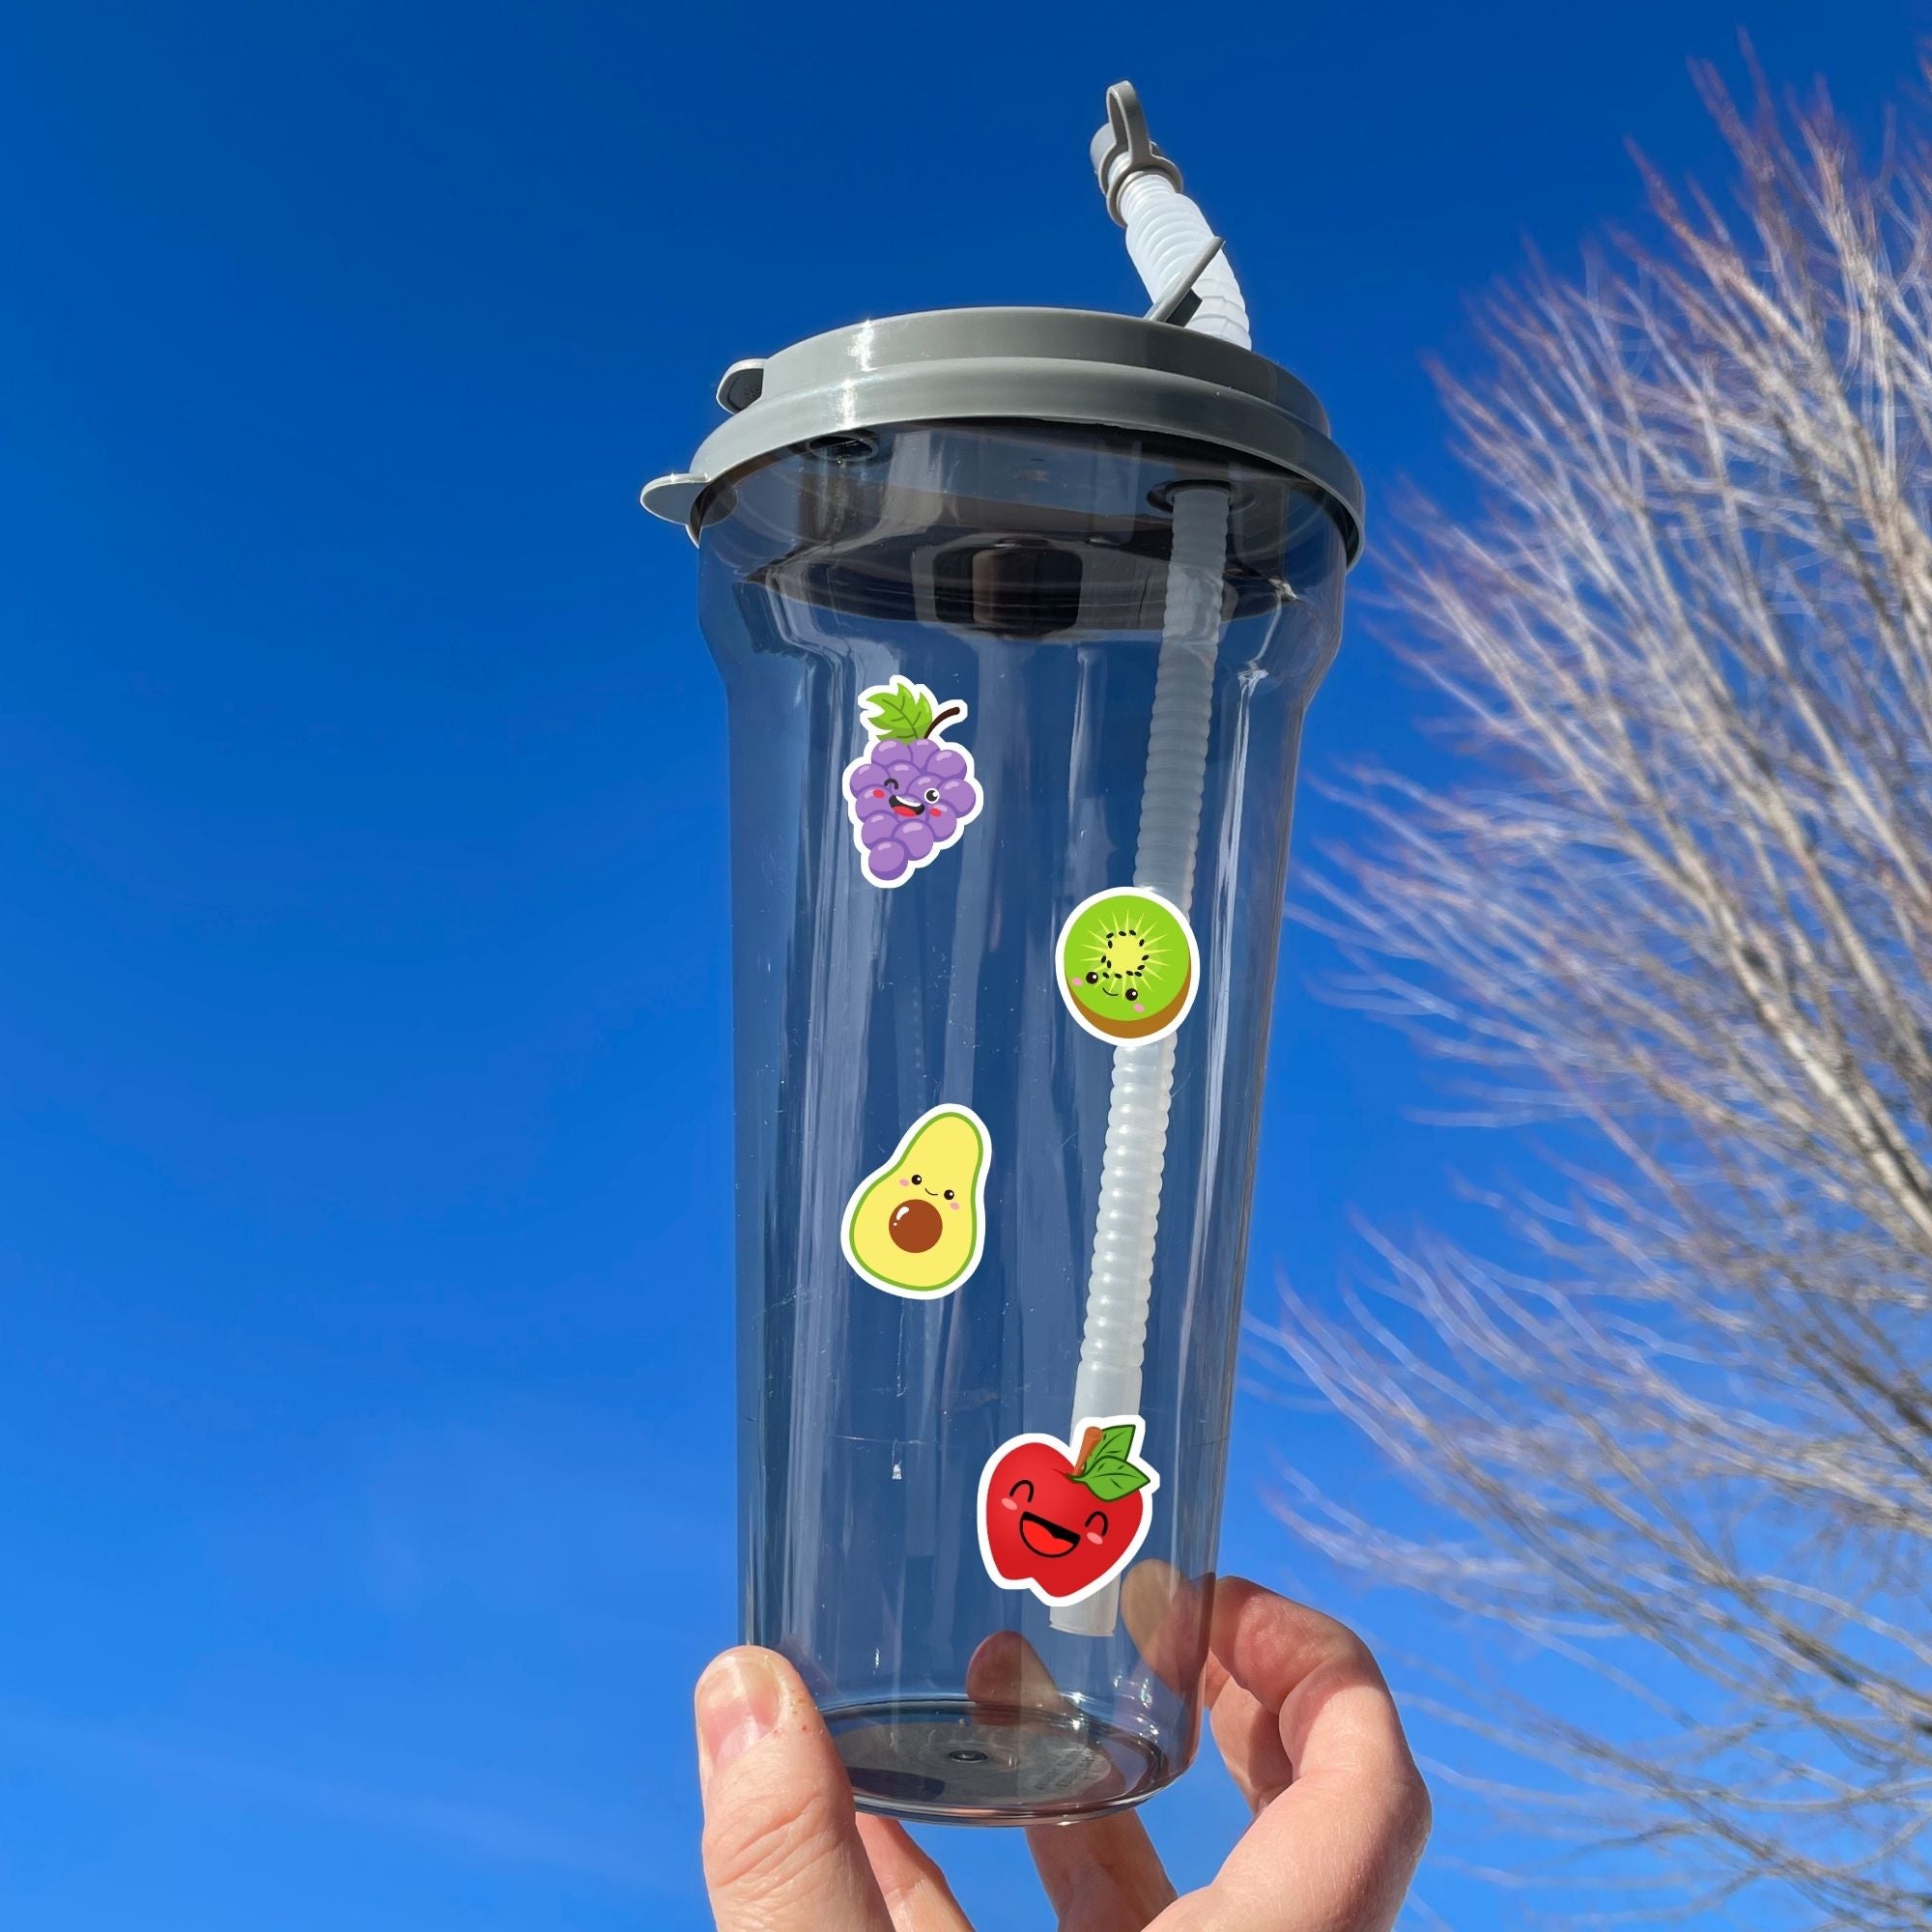 Filled with sticker images of cute fruit, this sticker sheet is sure to put a smile on anyone's face! This image shows a water bottle with stickers of a winking bunch of purple grapes, a kiwi, an avocado, and a laughing apple applied to it.